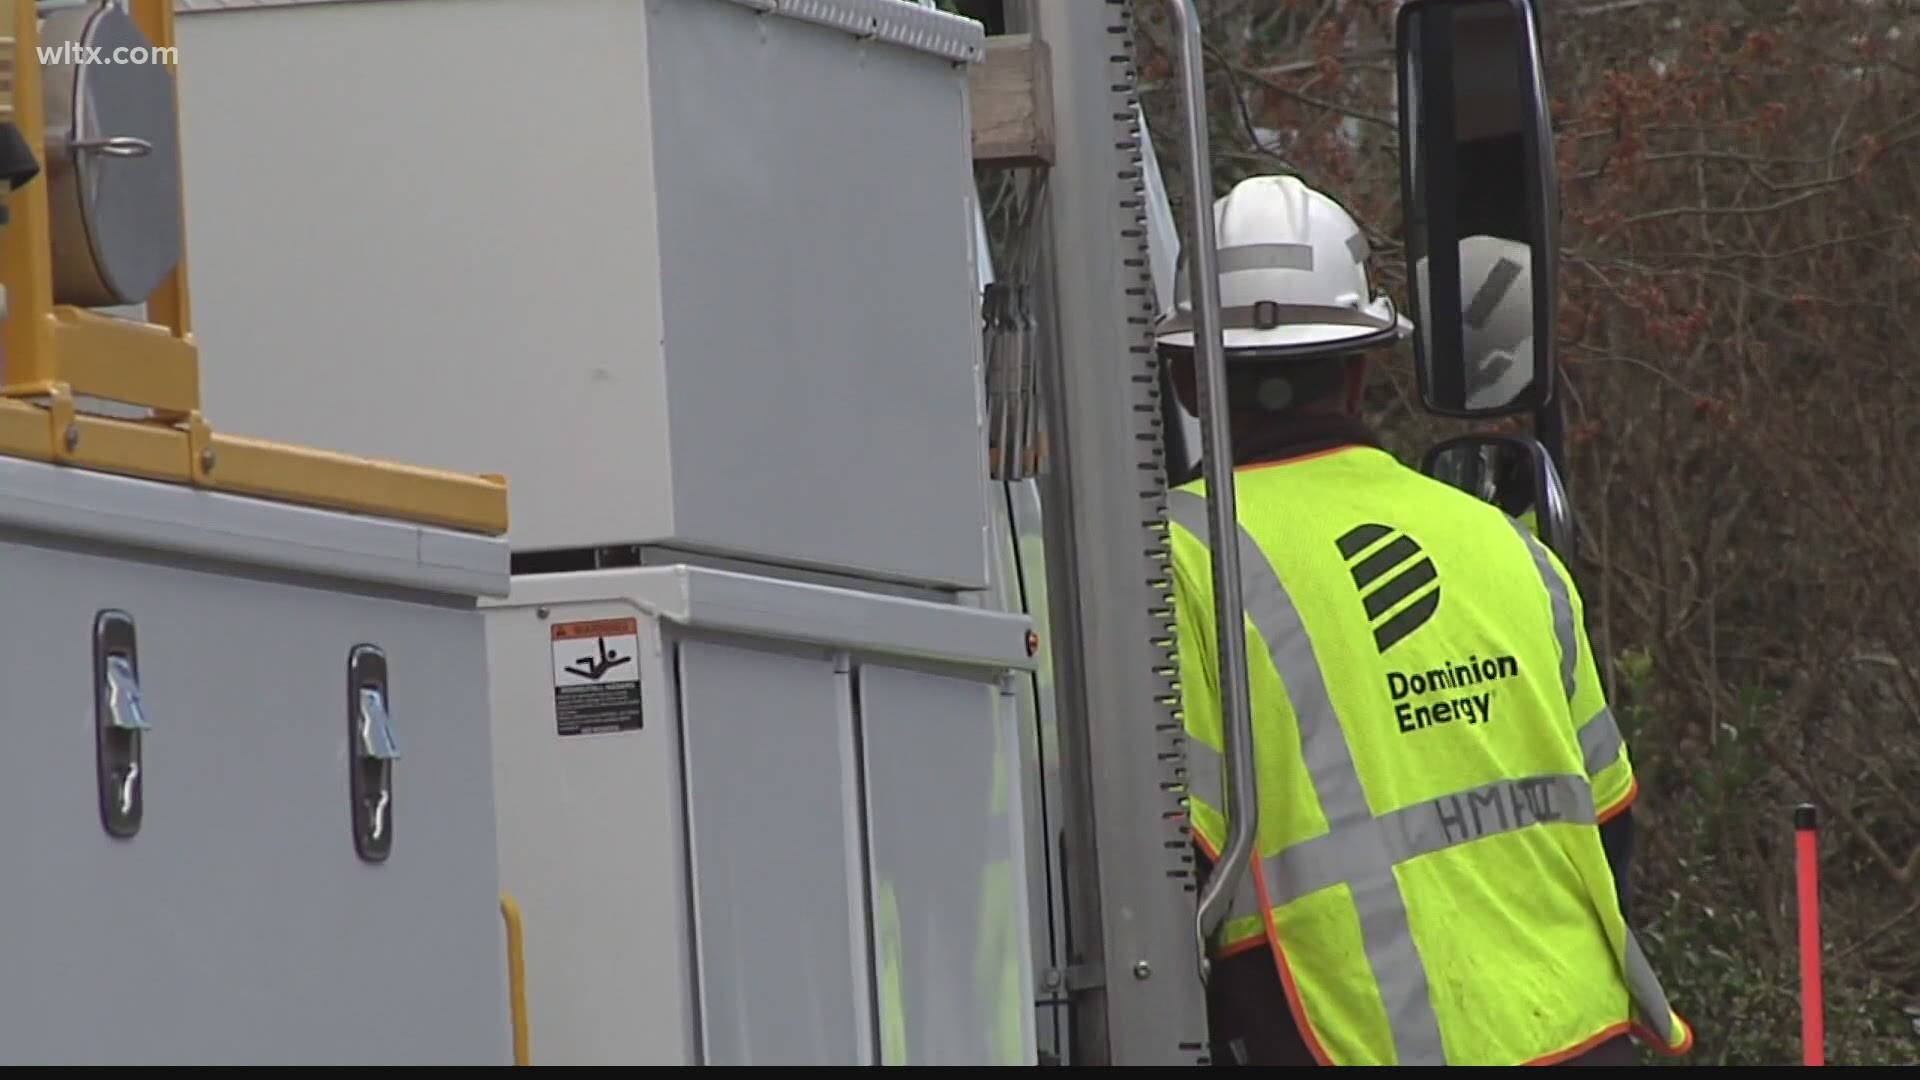 Dominion Energy is warning customers about scammers claiming to represent the company.